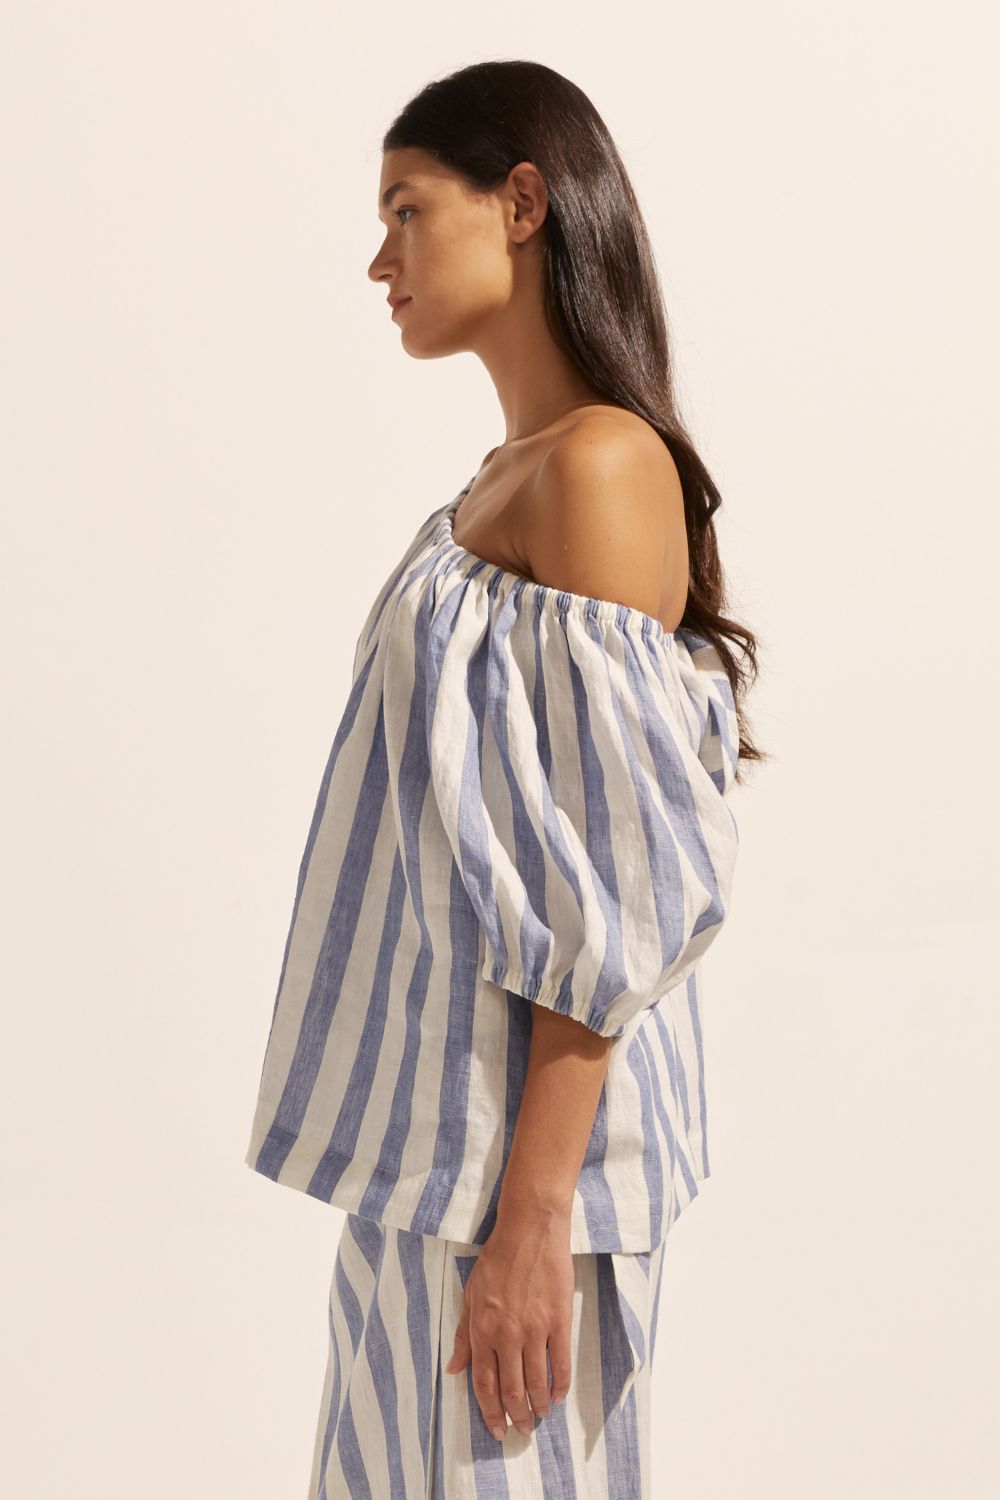 blue and white stripe, top, off the shoulder, mid length sleeve, side image